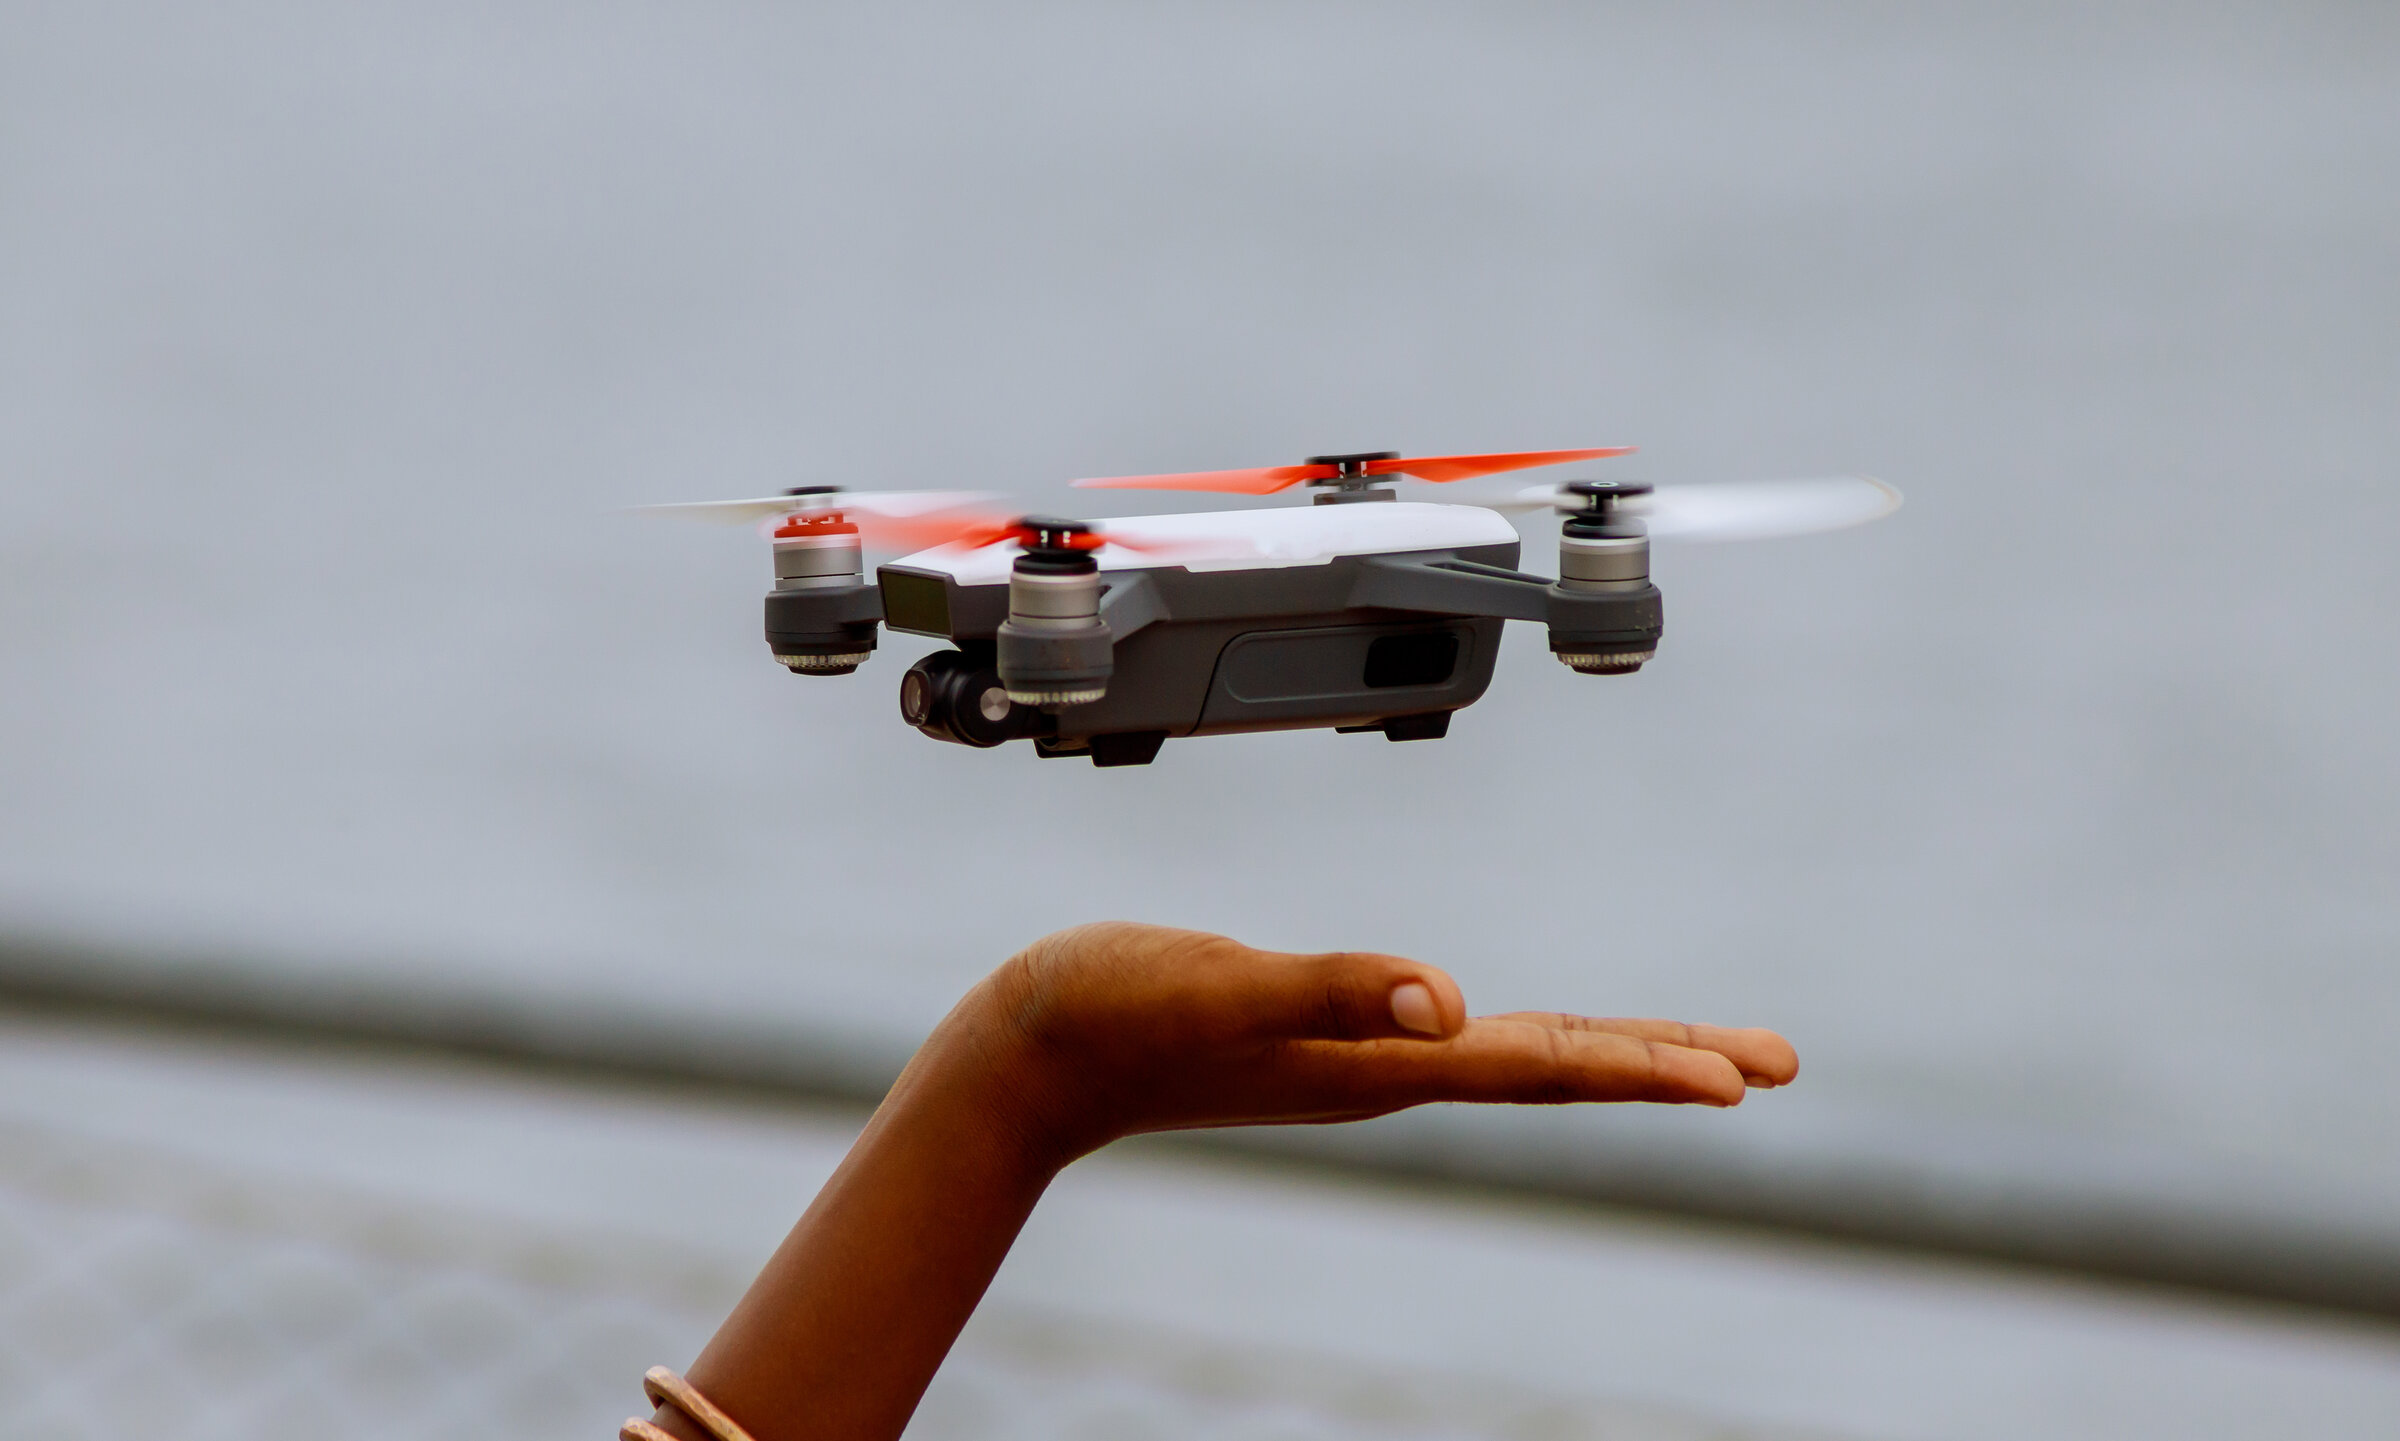 DMO insurance for drones under 250g